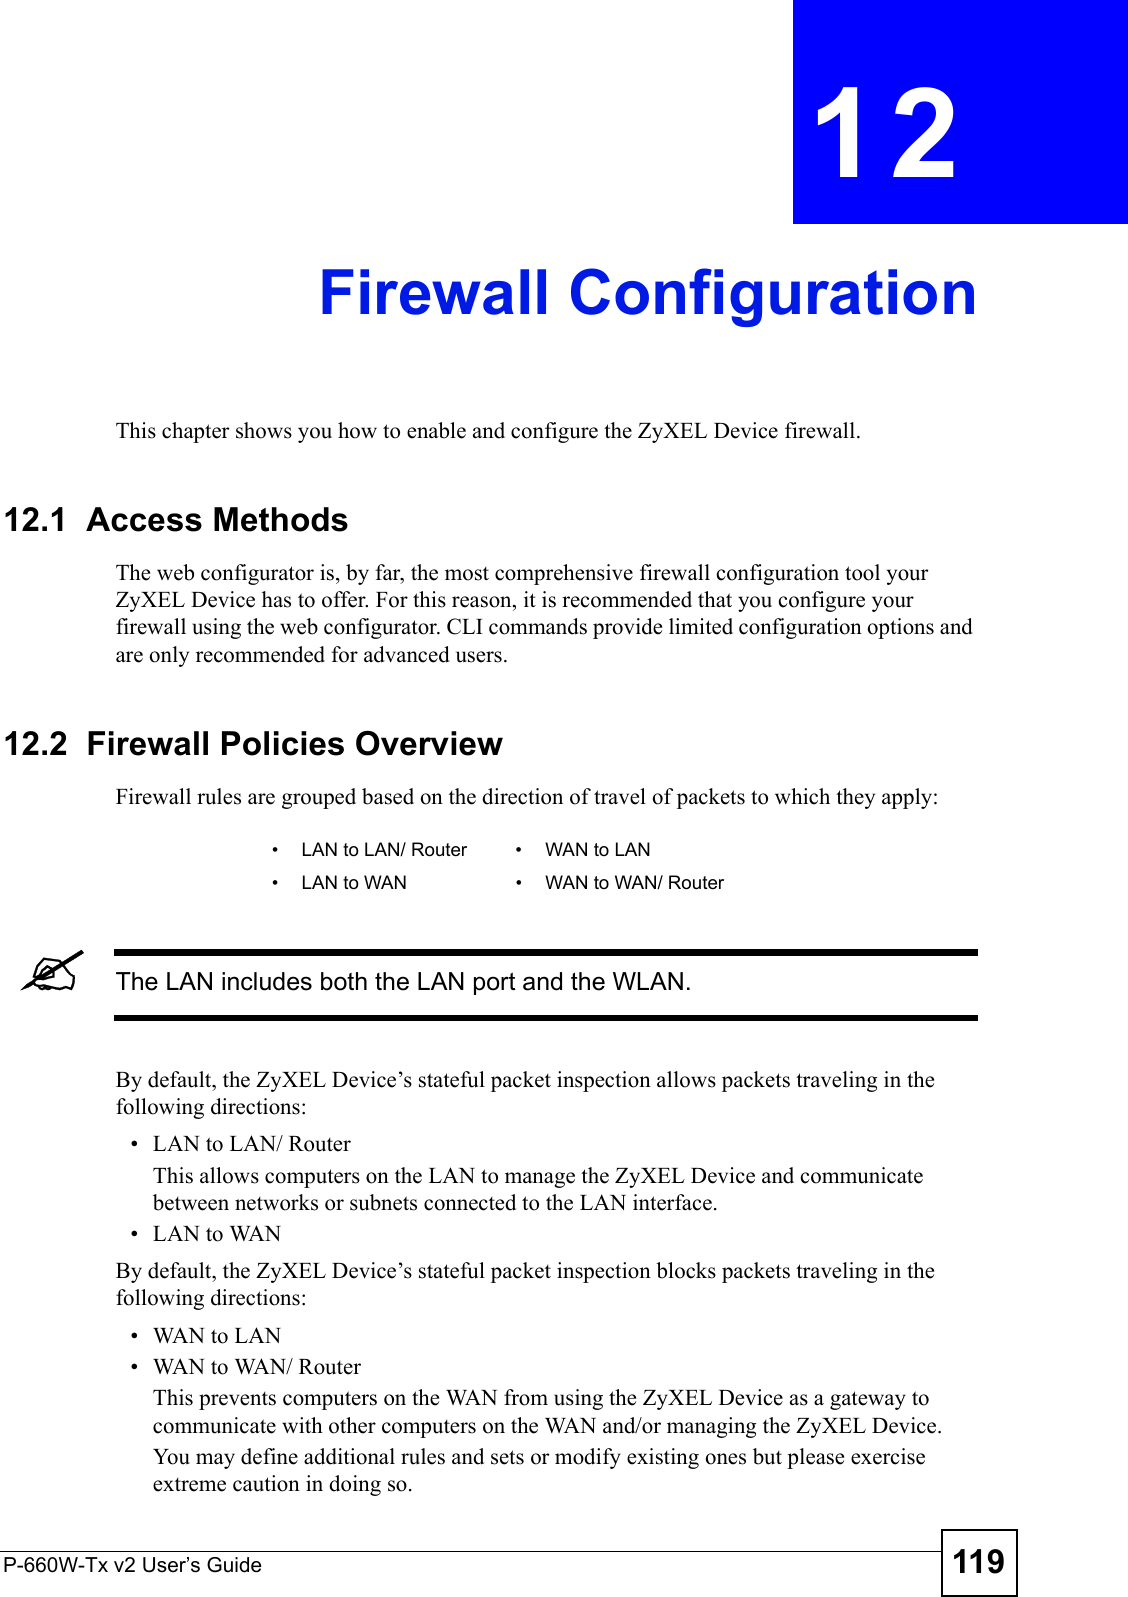 P-660W-Tx v2 User’s Guide 119CHAPTER  12 Firewall ConfigurationThis chapter shows you how to enable and configure the ZyXEL Device firewall.12.1  Access MethodsThe web configurator is, by far, the most comprehensive firewall configuration tool your ZyXEL Device has to offer. For this reason, it is recommended that you configure your firewall using the web configurator. CLI commands provide limited configuration options and are only recommended for advanced users.12.2  Firewall Policies Overview  Firewall rules are grouped based on the direction of travel of packets to which they apply: &quot;The LAN includes both the LAN port and the WLAN.By default, the ZyXEL Device’s stateful packet inspection allows packets traveling in the following directions:• LAN to LAN/ Router This allows computers on the LAN to manage the ZyXEL Device and communicate between networks or subnets connected to the LAN interface.• LAN to WANBy default, the ZyXEL Device’s stateful packet inspection blocks packets traveling in the following directions:•WAN to LAN•WAN to WAN/ Router This prevents computers on the WAN from using the ZyXEL Device as a gateway to communicate with other computers on the WAN and/or managing the ZyXEL Device.You may define additional rules and sets or modify existing ones but please exercise extreme caution in doing so.• LAN to LAN/ Router • WAN to LAN• LAN to WAN • WAN to WAN/ Router